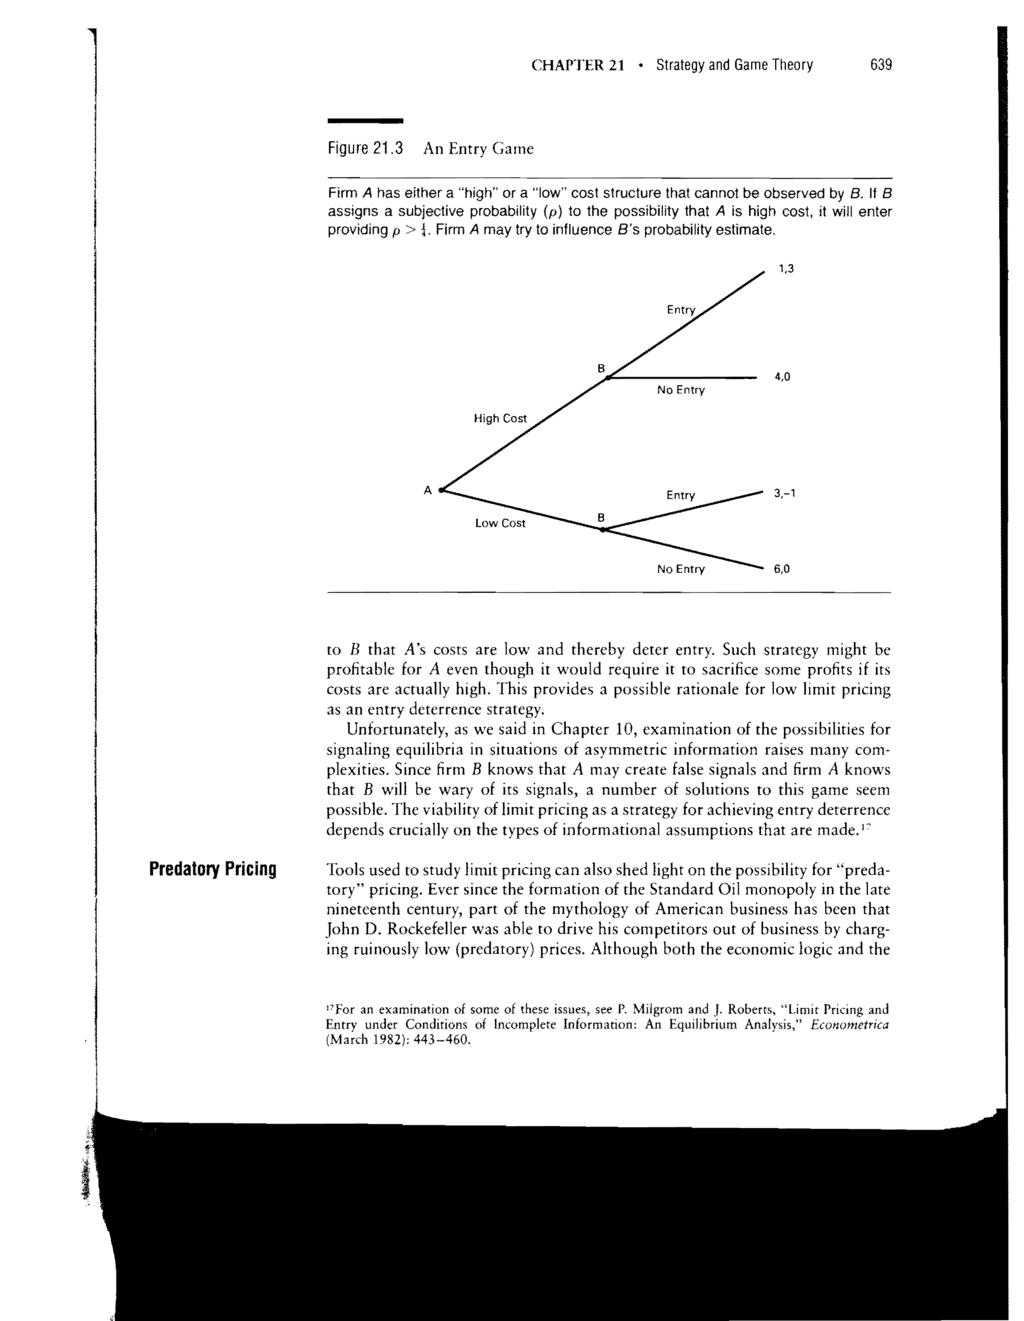 CHAPTER 21 Strategy and Game Theory 639 Figure 21.3 An Entry Game Firm A has either a "high" or a "low" cost structure that cannot be observed by B.